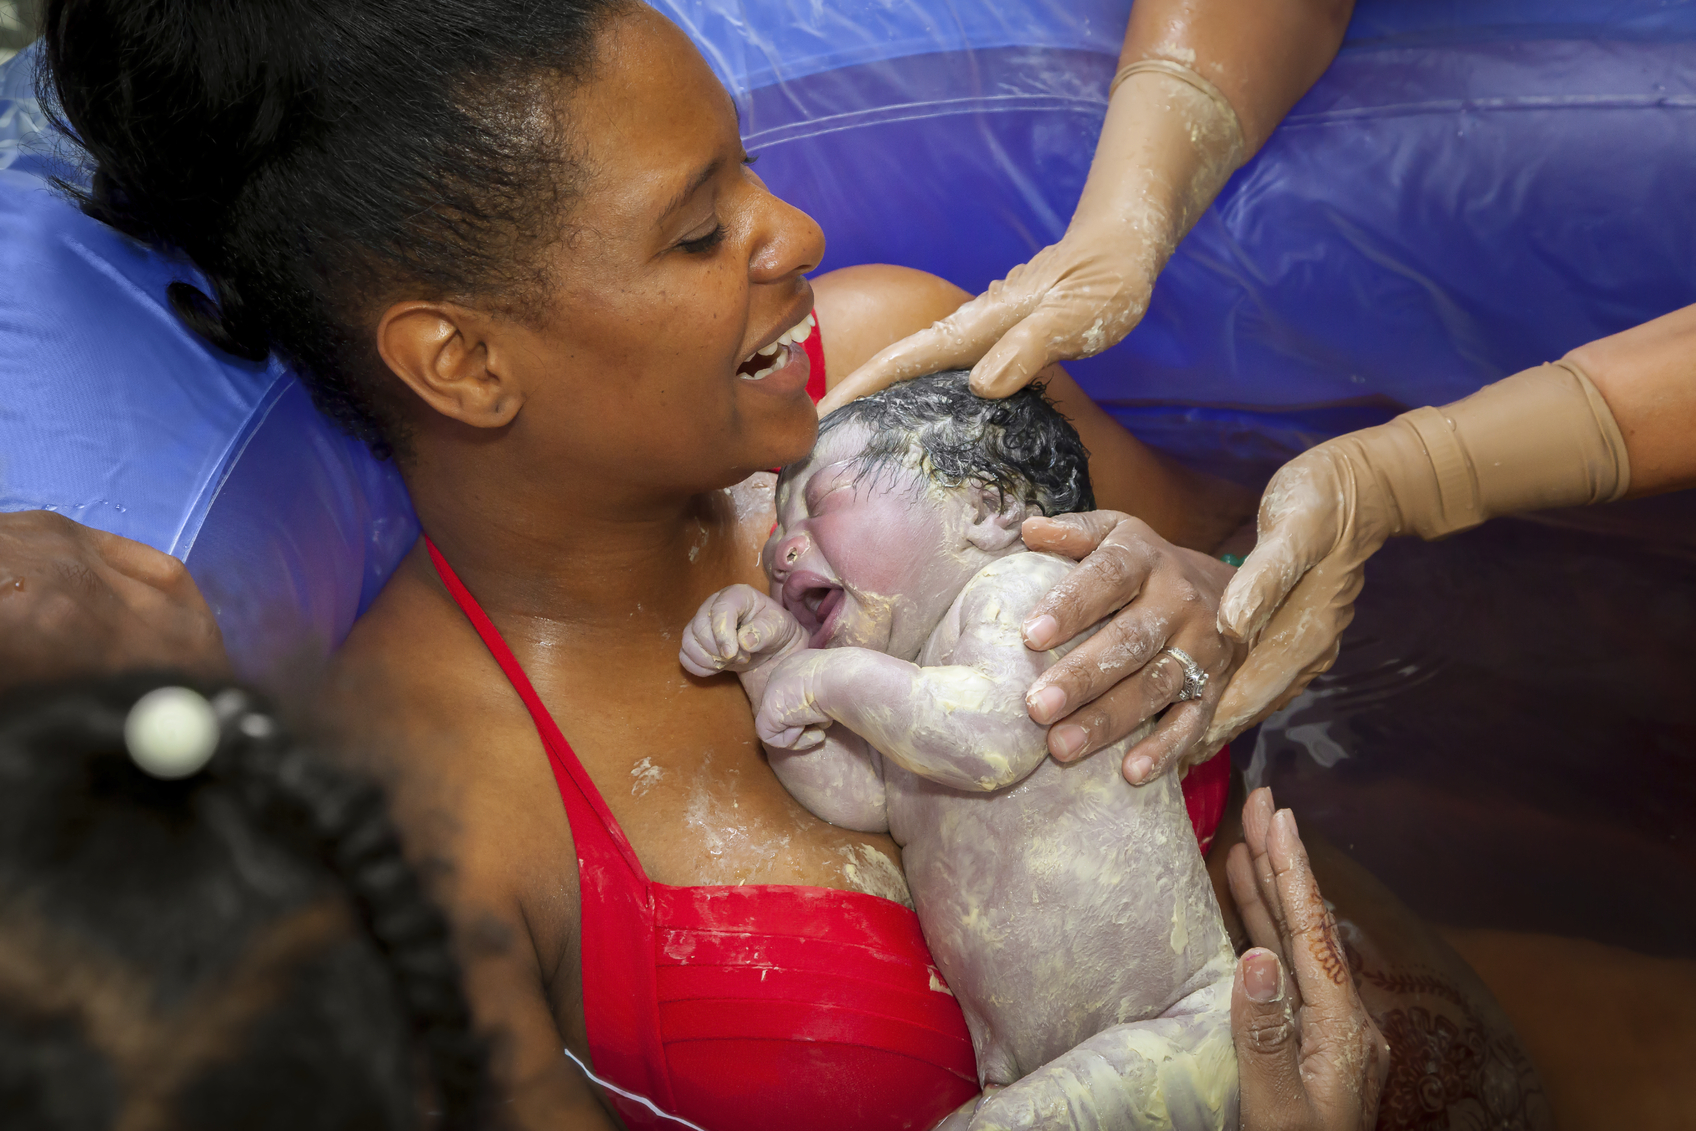 A happy African American mother holding her brand new baby girl after delivering her in a birthing pool at home. The baby is covered in vernix and the mom is laughing.